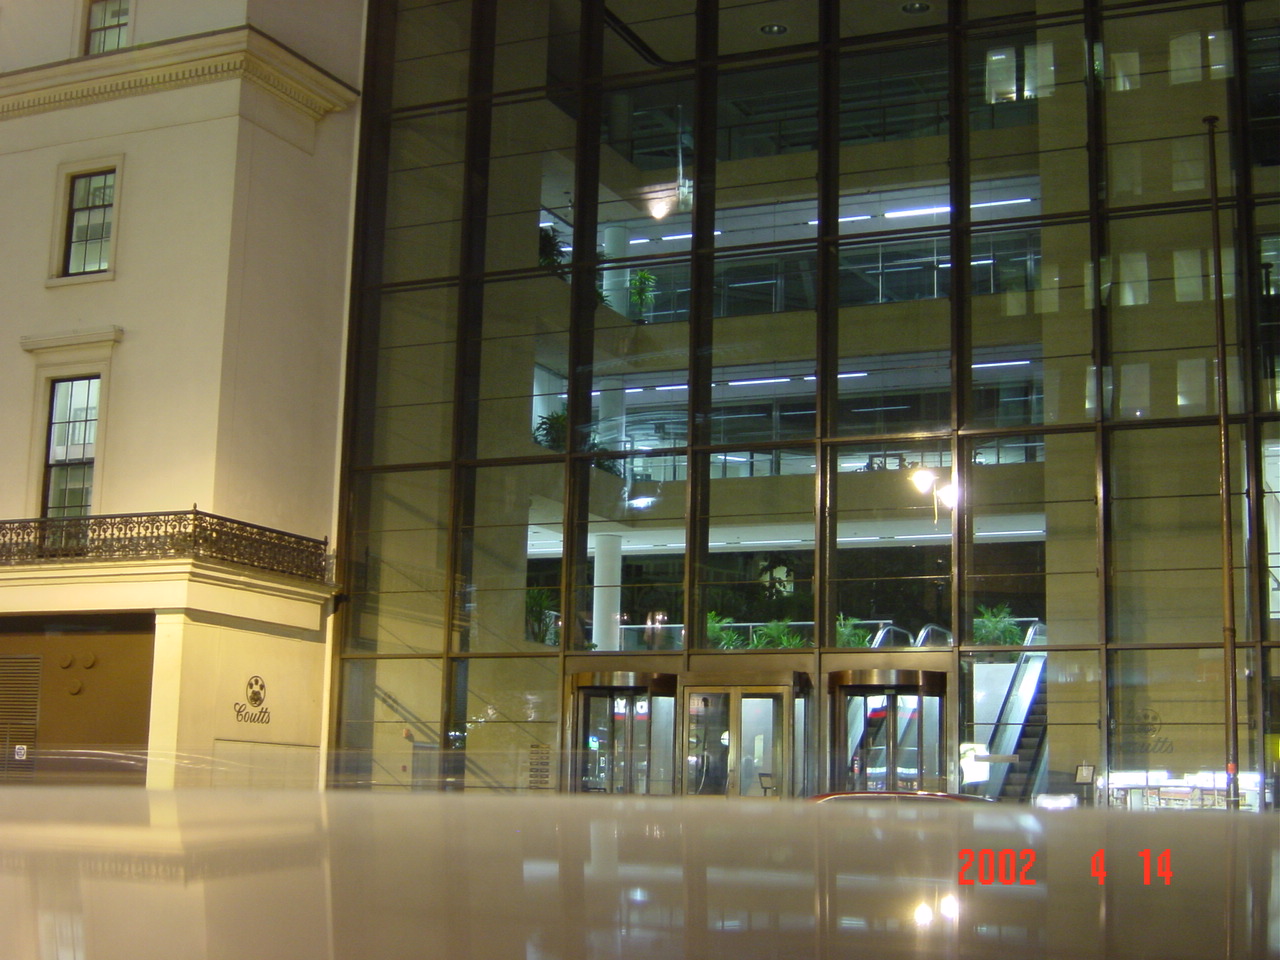 Coutts Headquarters